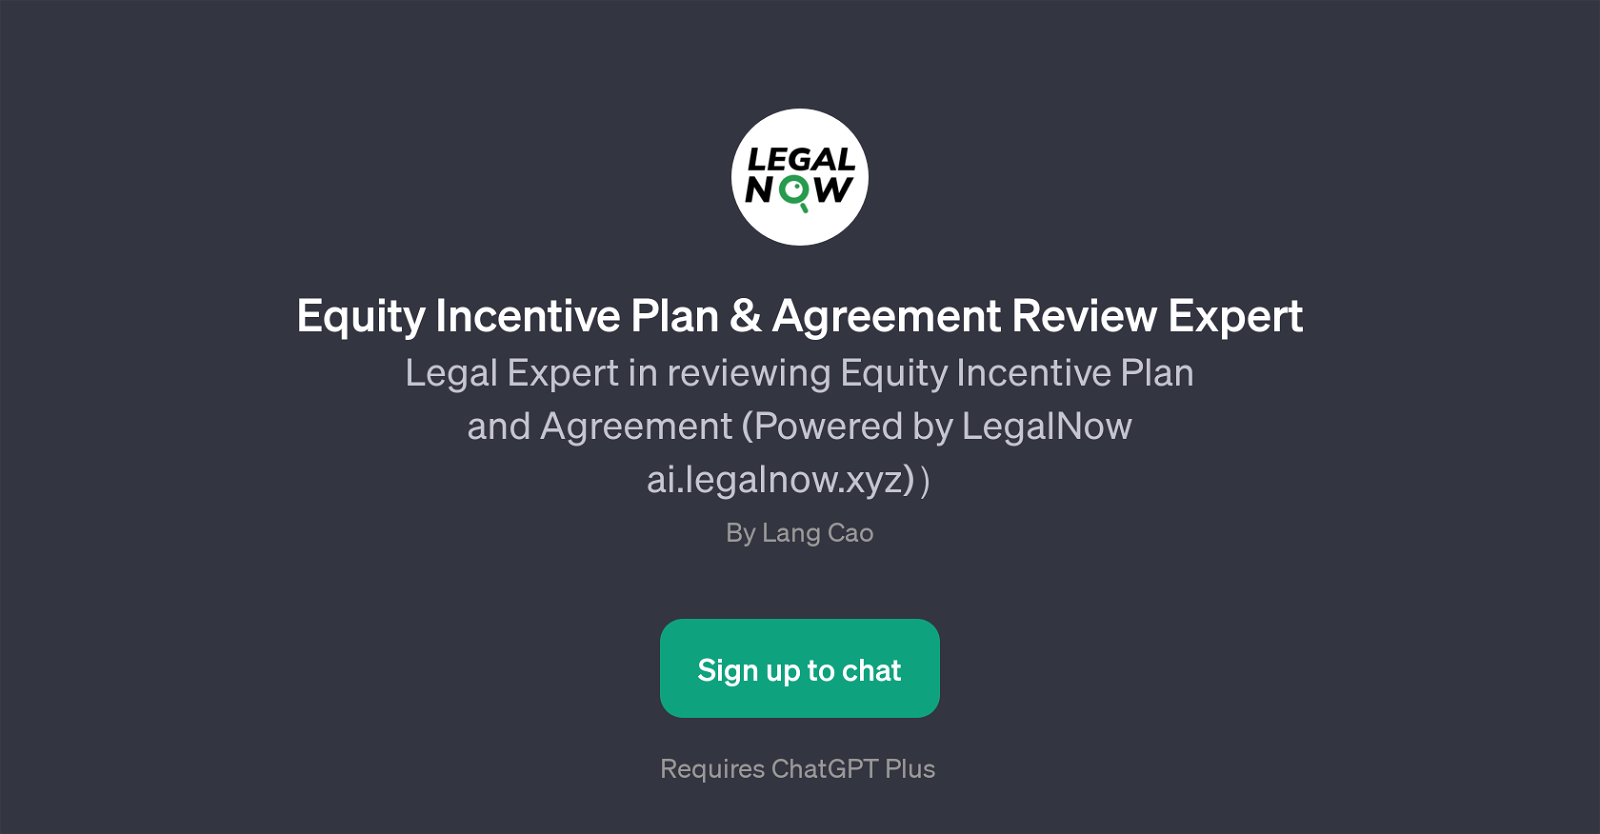 Equity Incentive Plan & Agreement Review Expert website